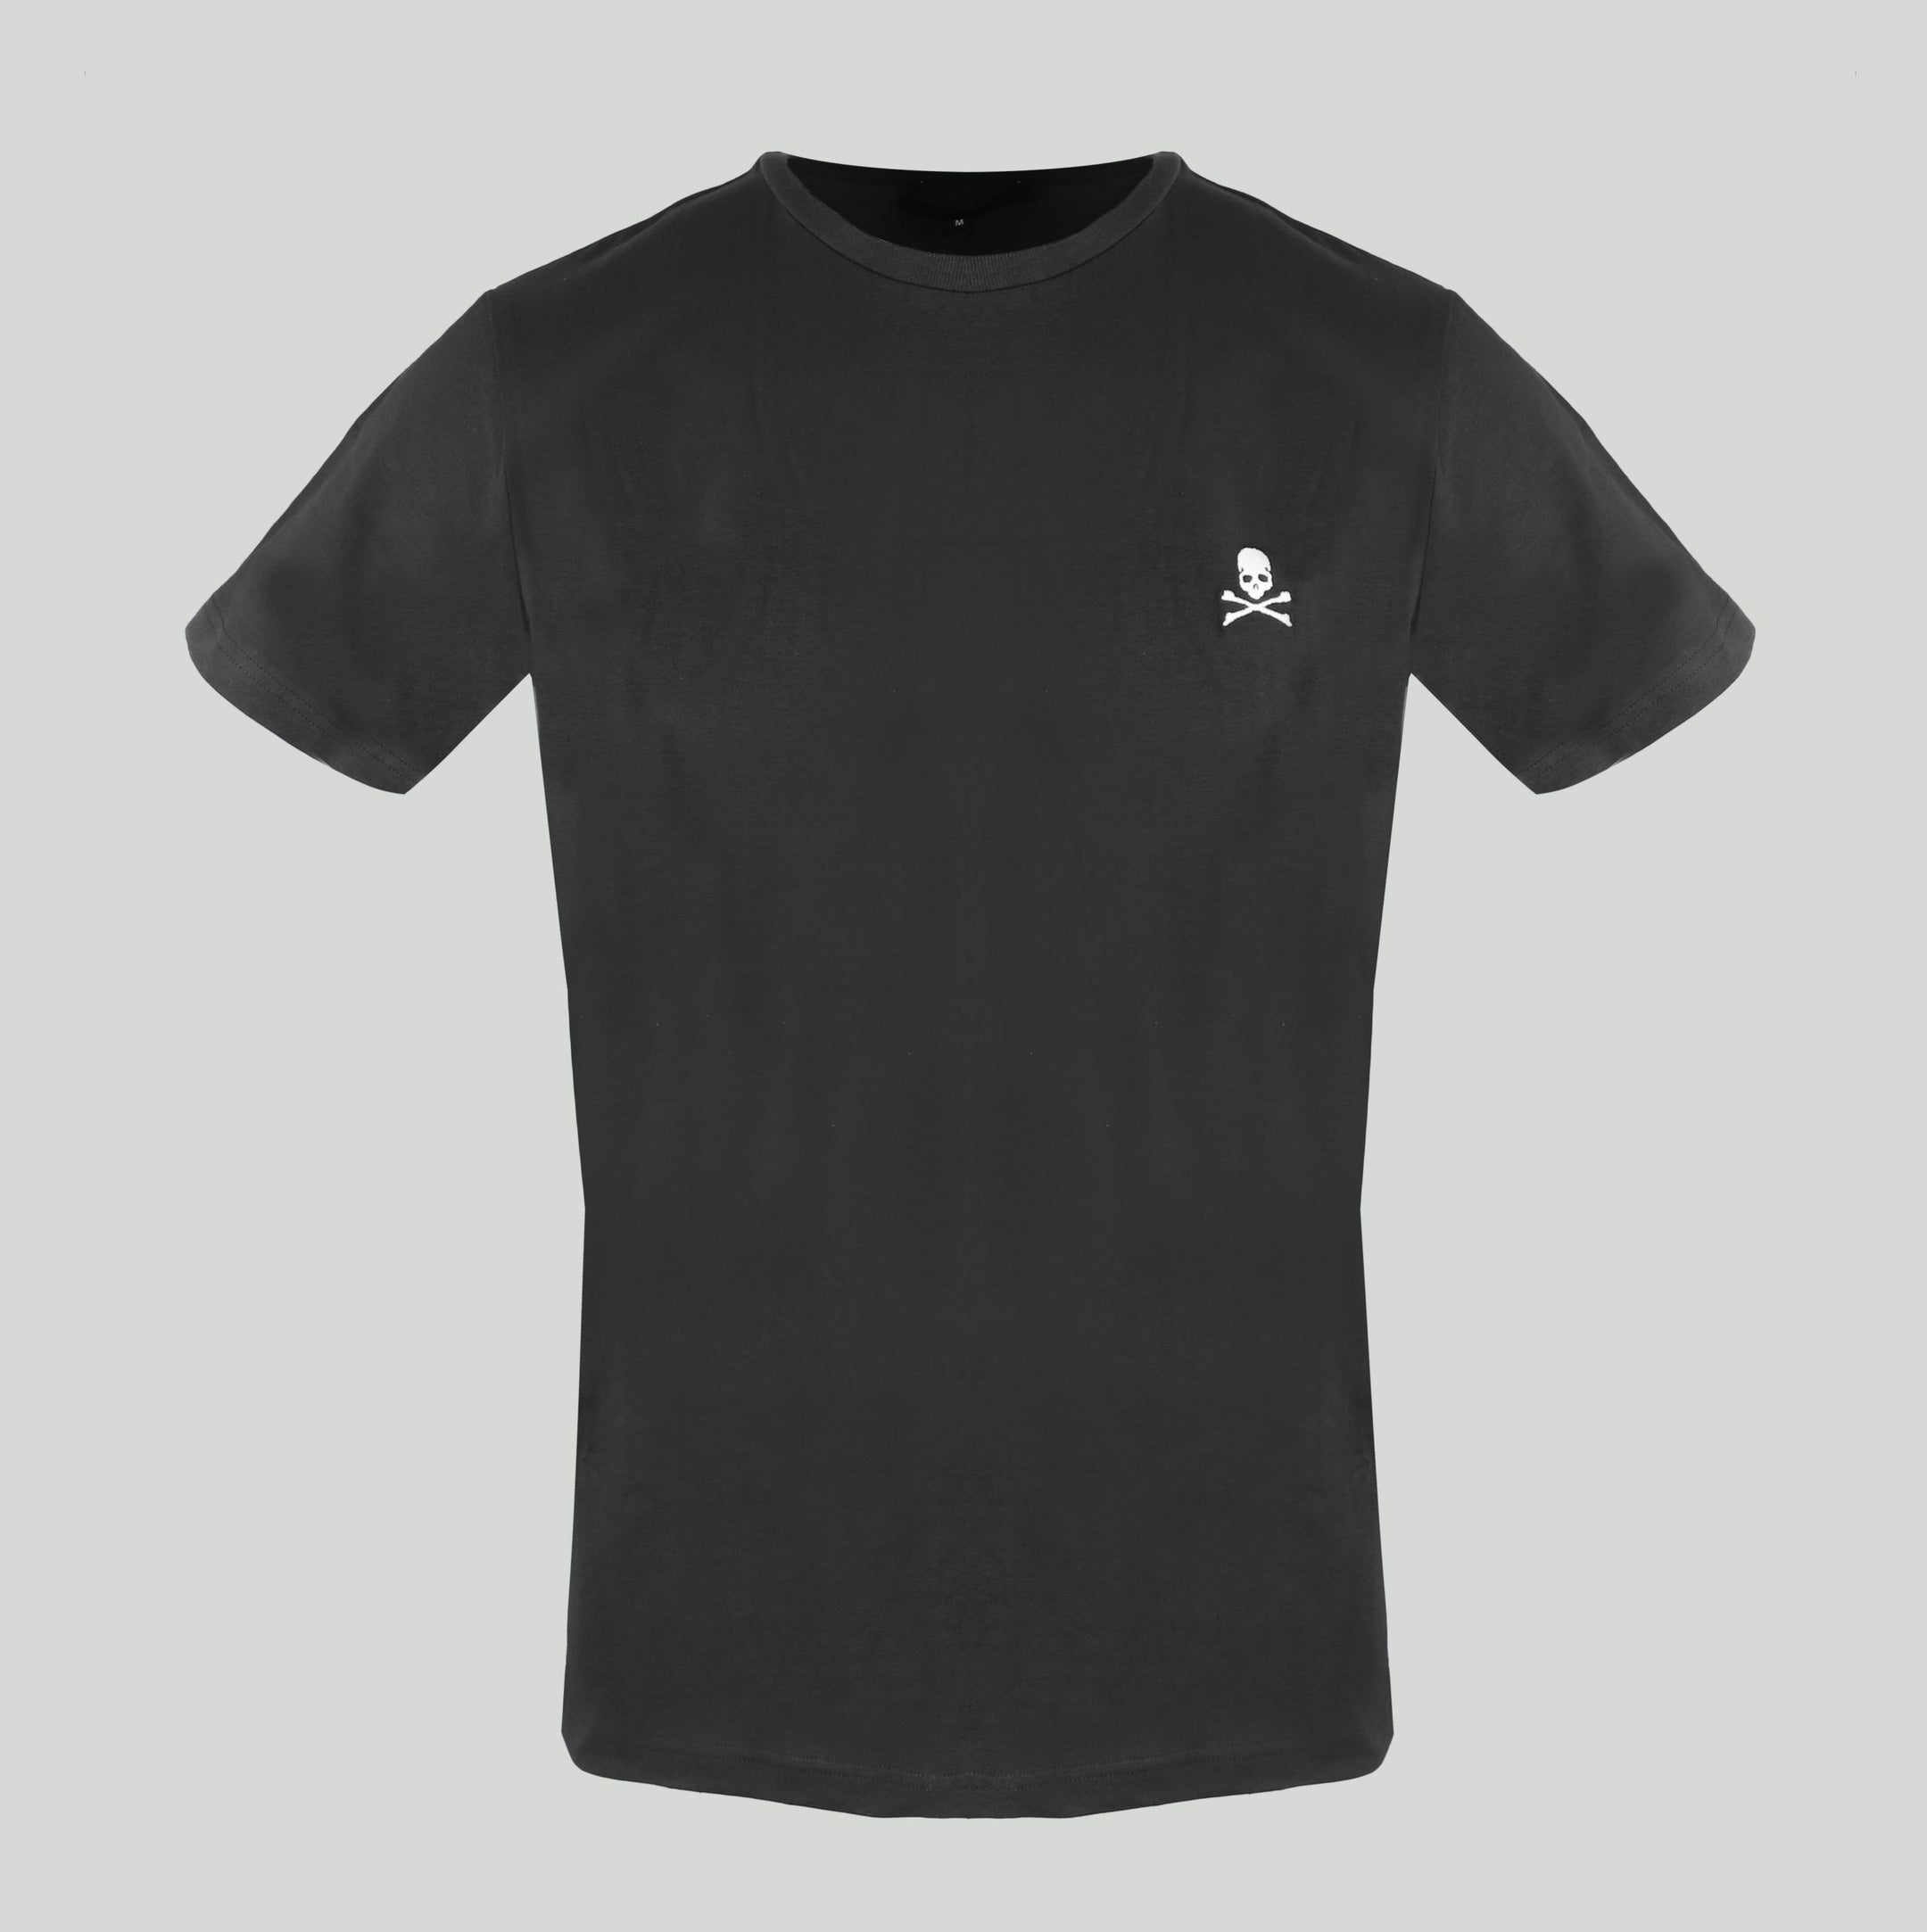 Elite Black Cotton T-Shirt with Signature Embroidery